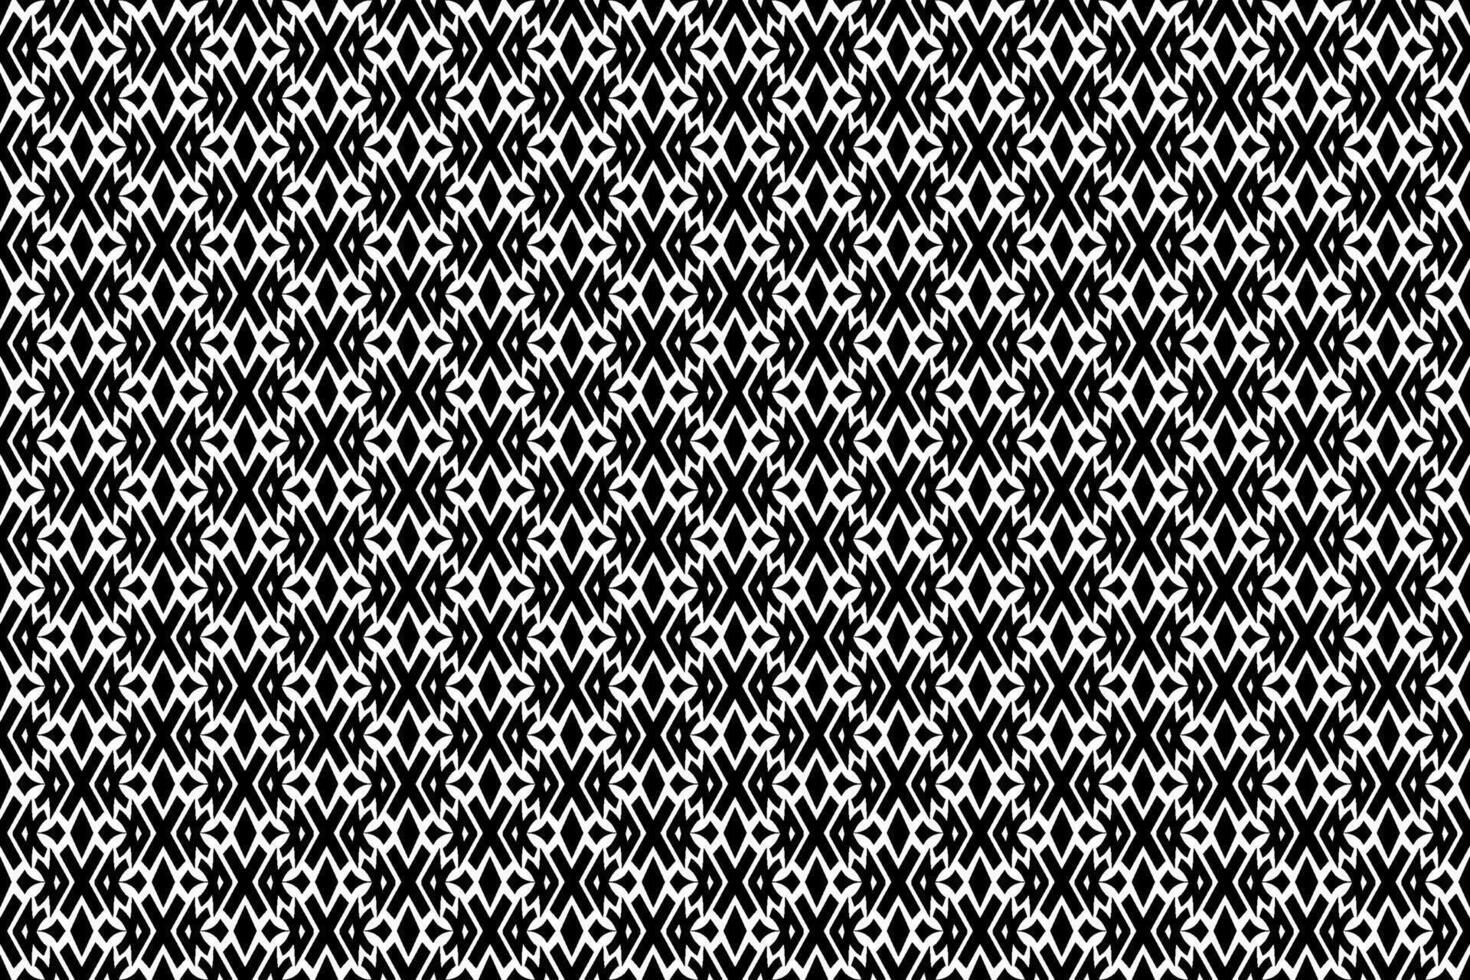 Abstract seamless mosaic pattern with repeating elements. Black and white monochrome textured pattern with geometric elements vector